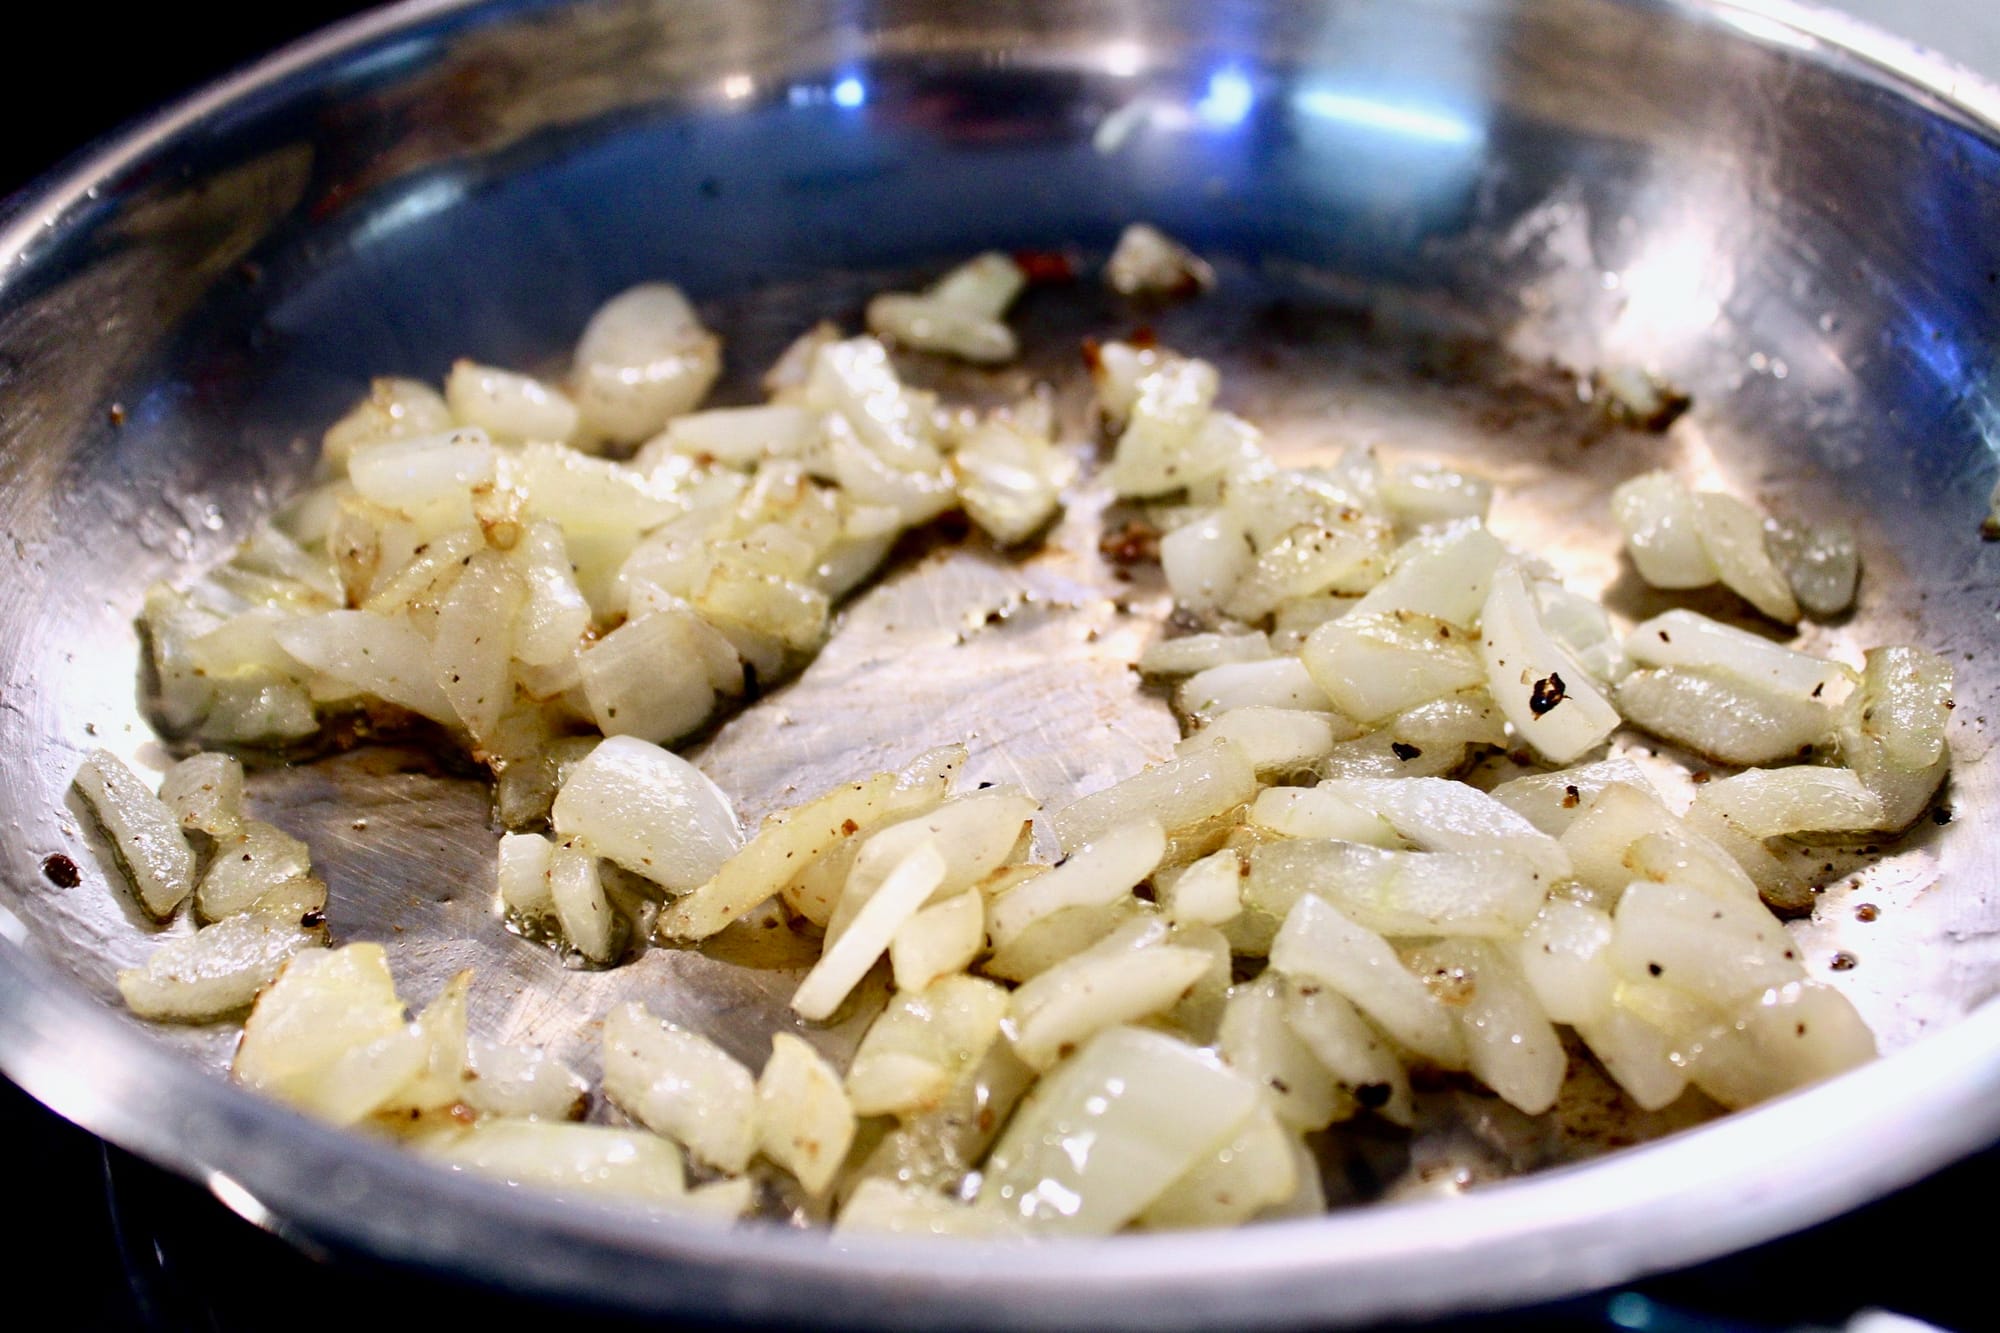 Sauteed onions for the meatloaf topping.